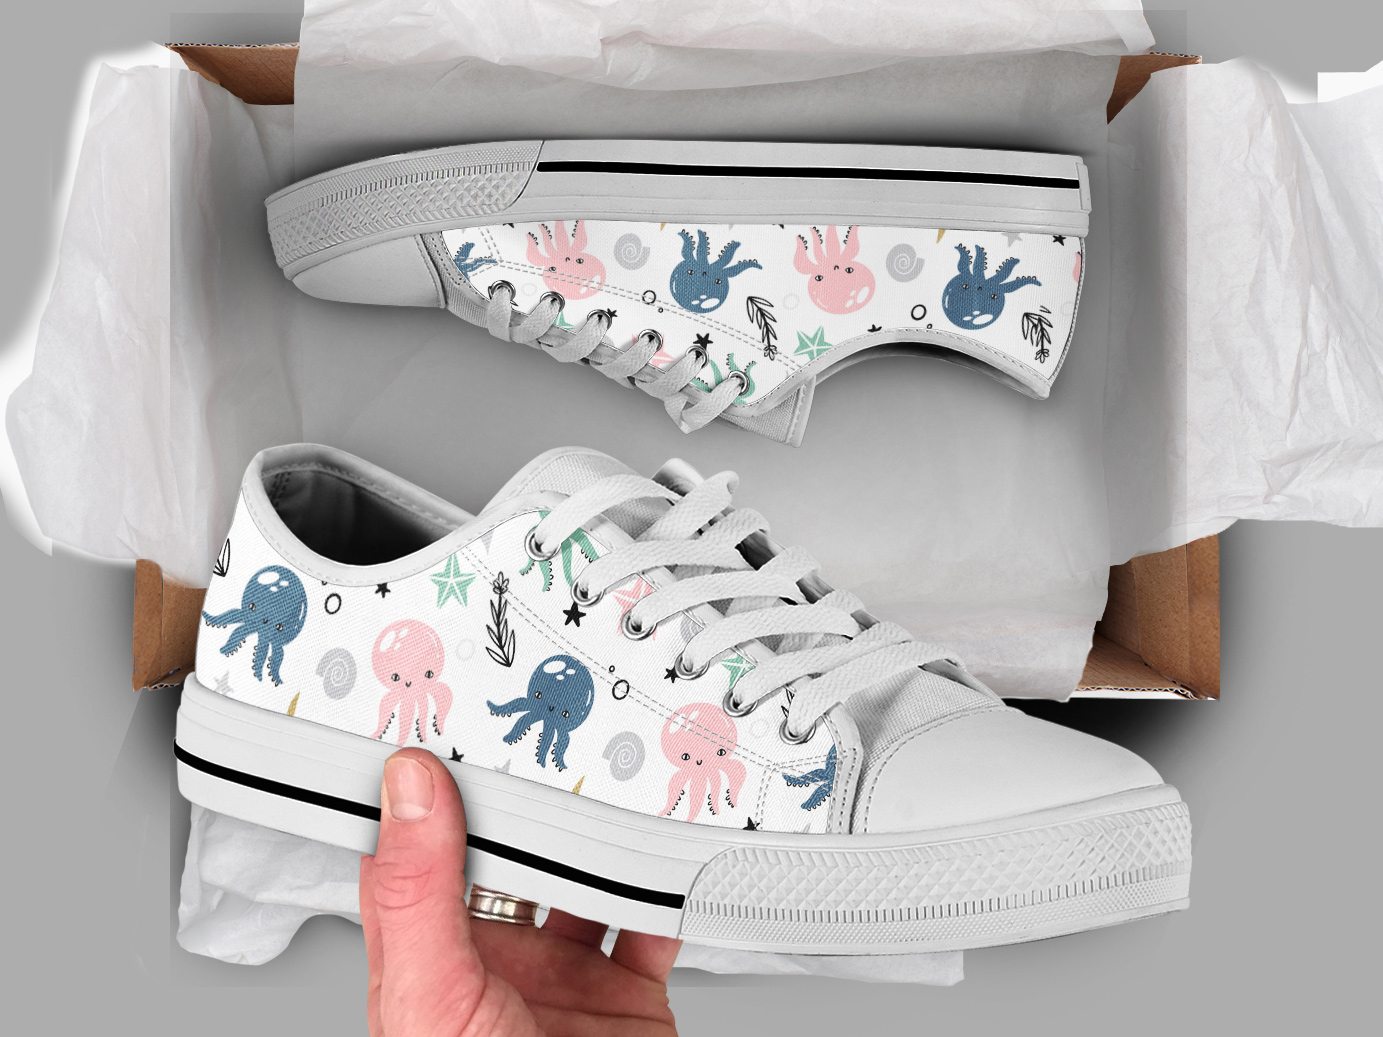 Printed Octopus Shoes | Custom Low Tops Sneakers For Kids & Adults